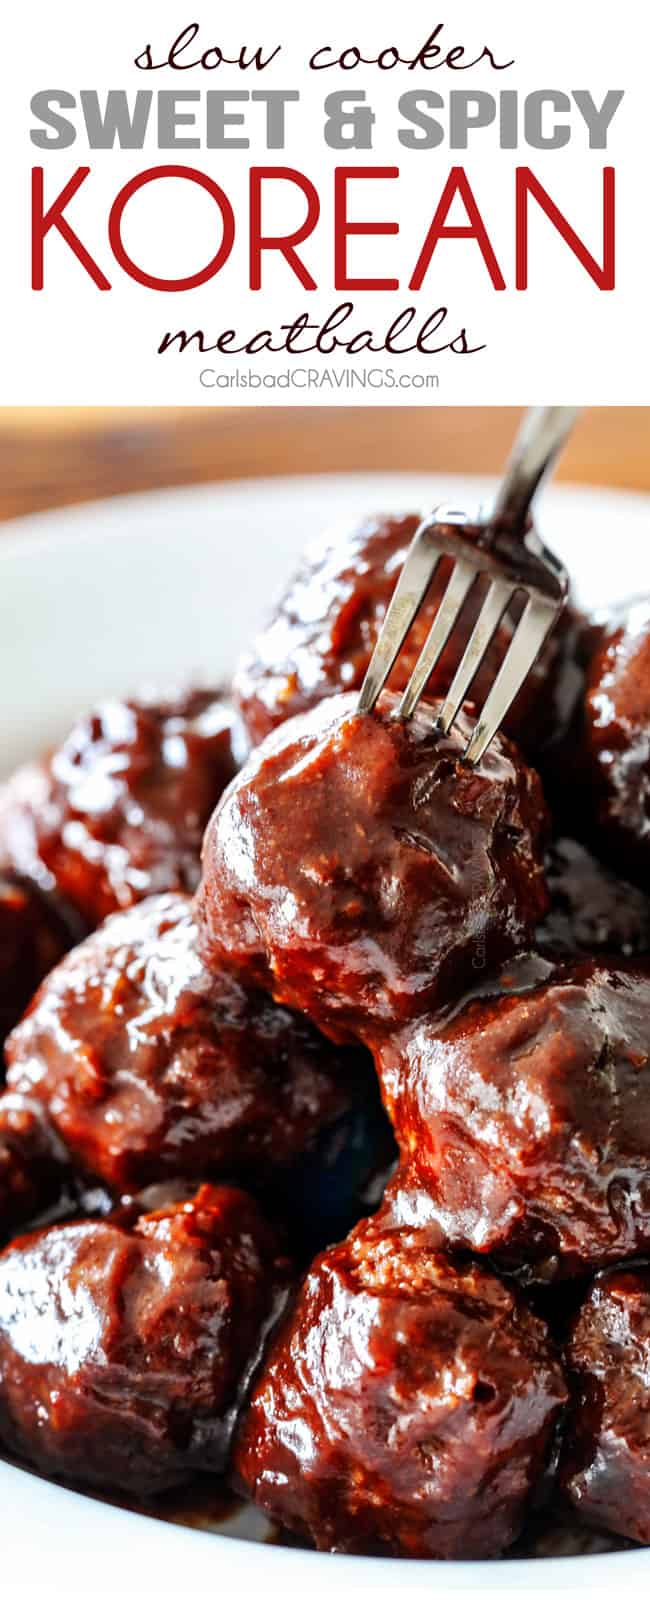 Korean Meatballs stacked on a white plate with a fork stabbing one of the meatballs